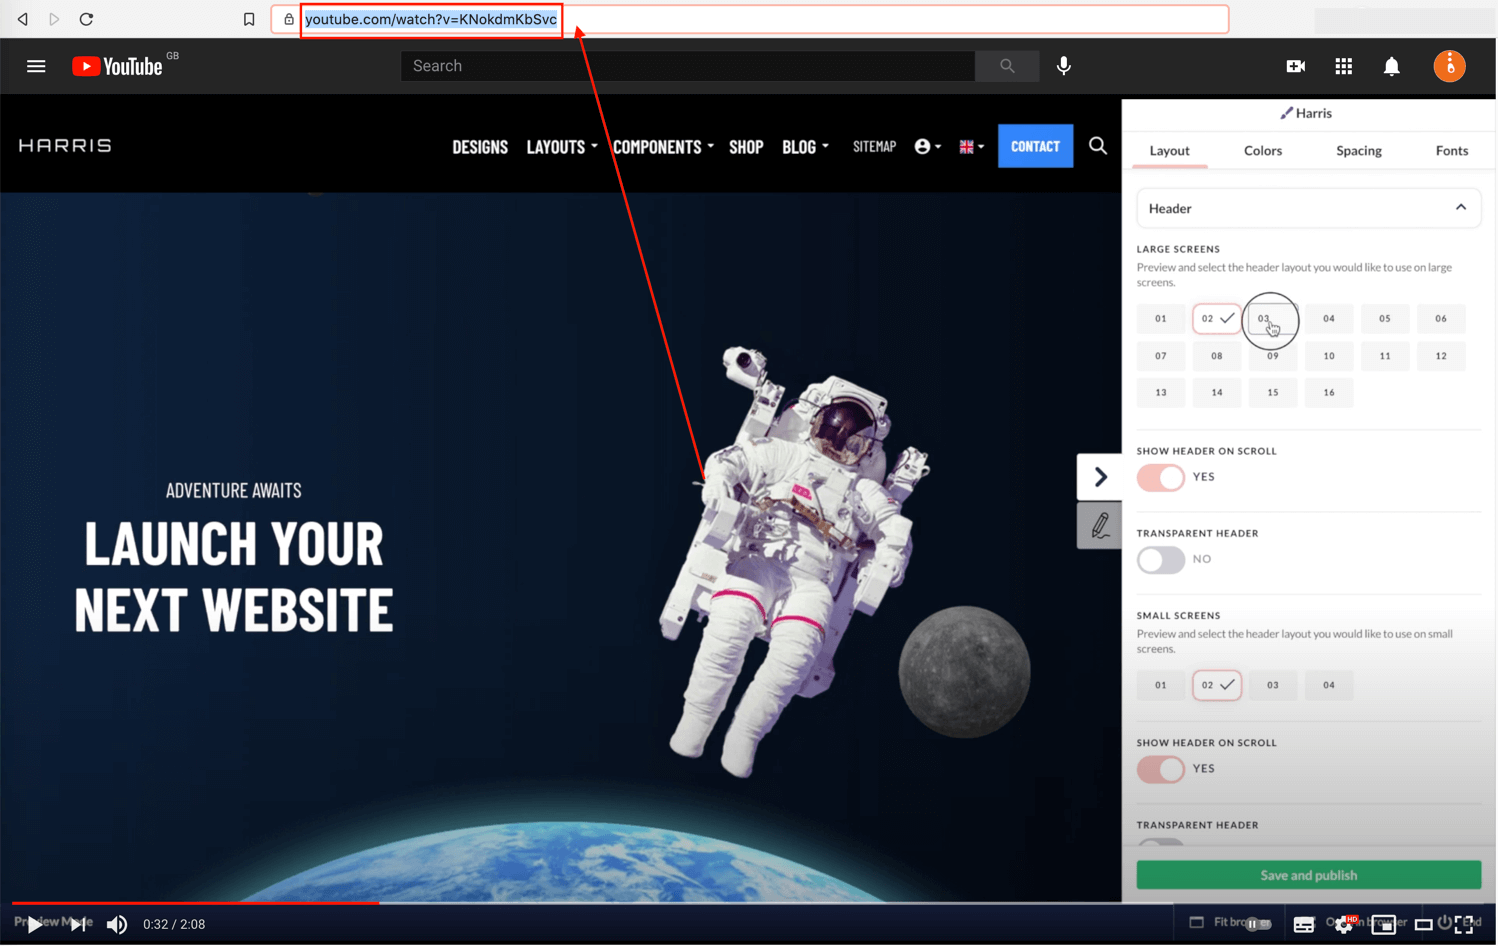 Copy the YouTube URL to display in Umbraco.